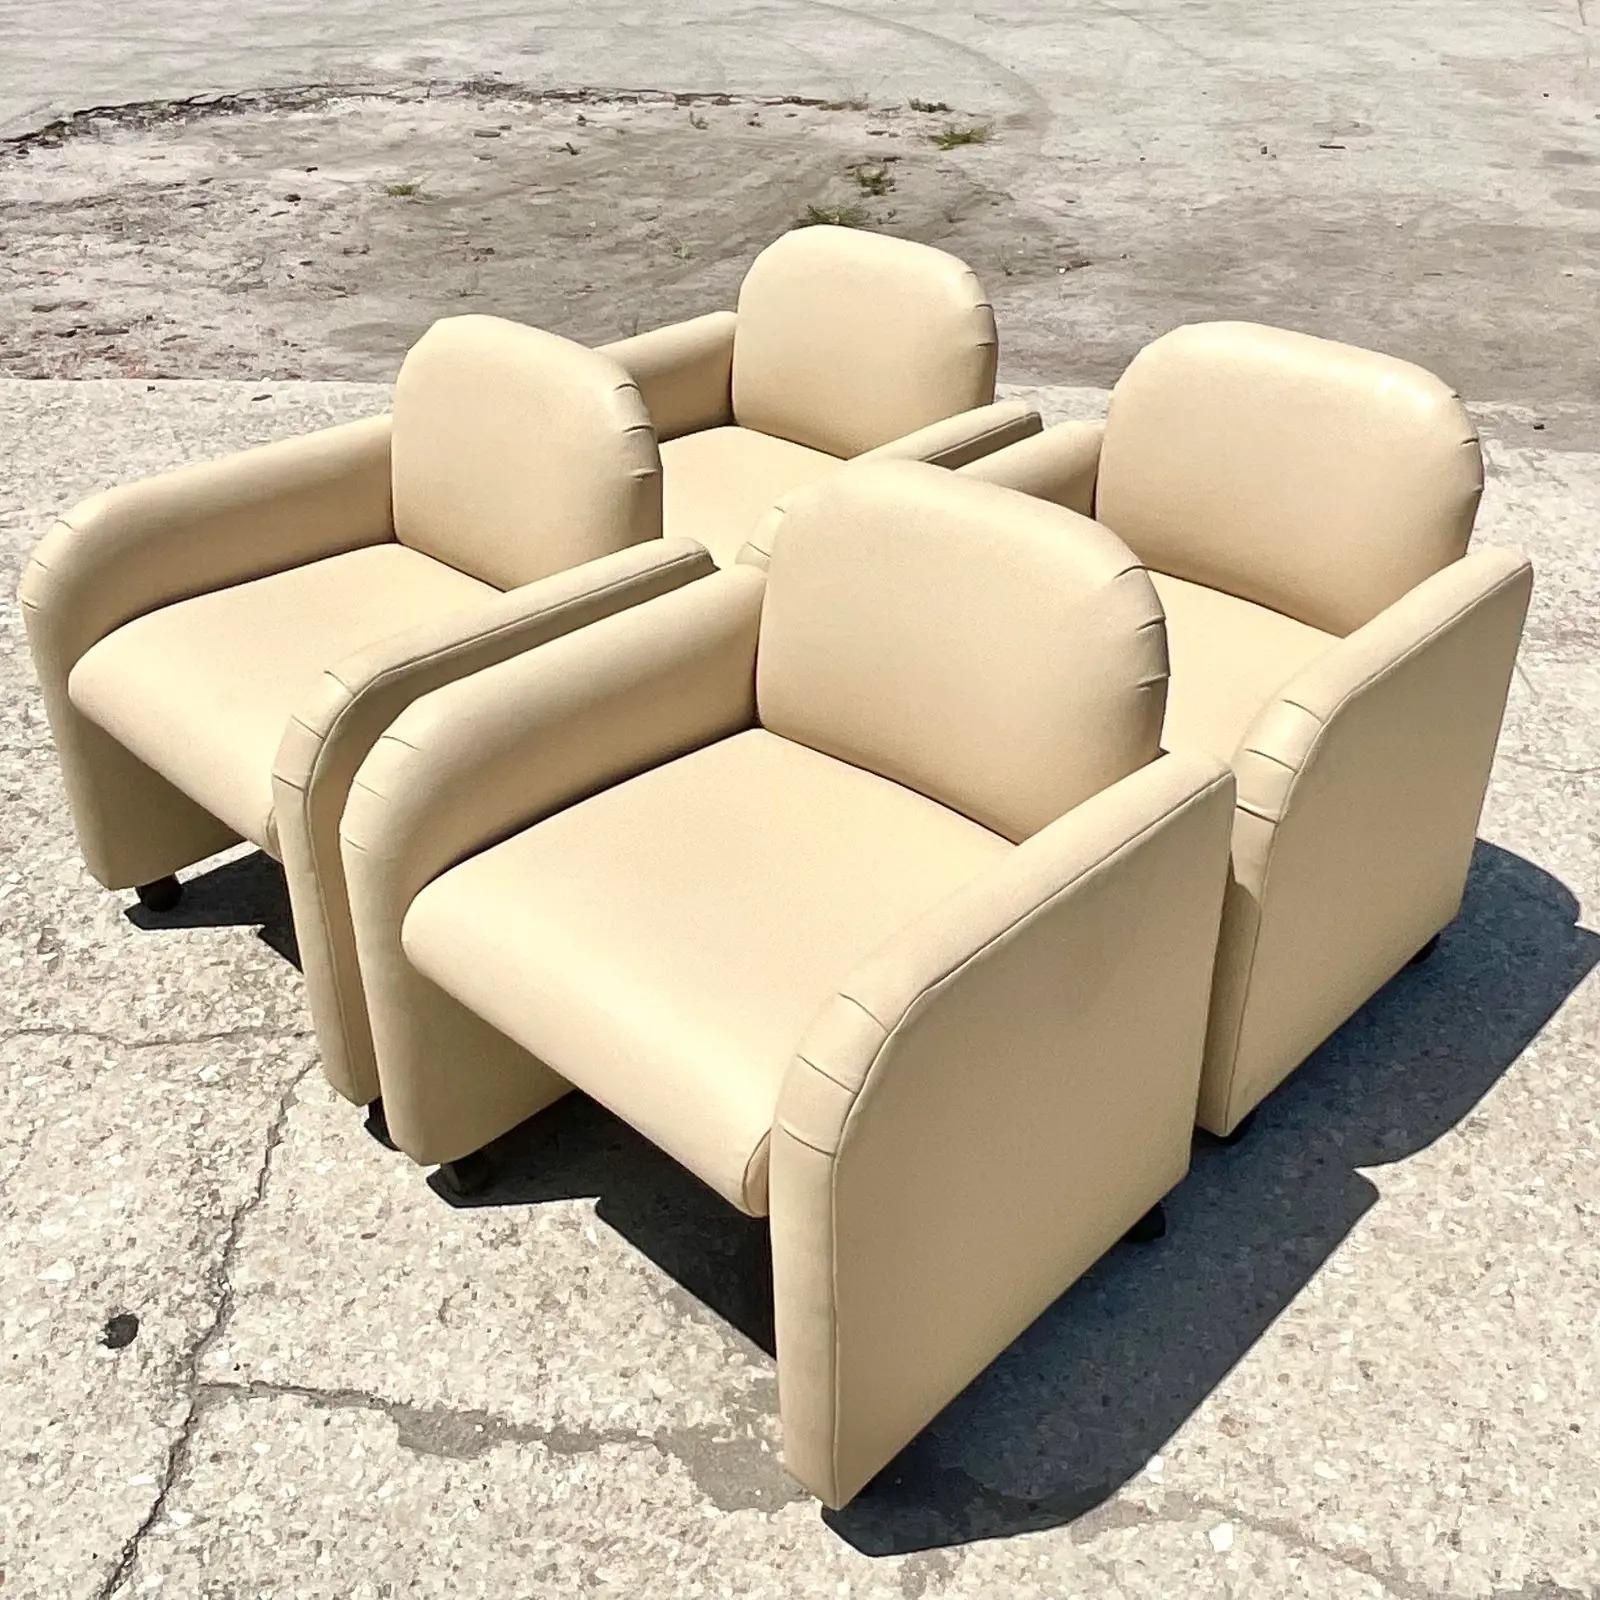 Fantastic set of four vintage PostModern lounge chairs. Beautiful leather upholstery in a classic shape. All chairs are on casters for easy movement. Easily for you to switch to regular feet if u prefer the chair to not move. Fabulous either way!